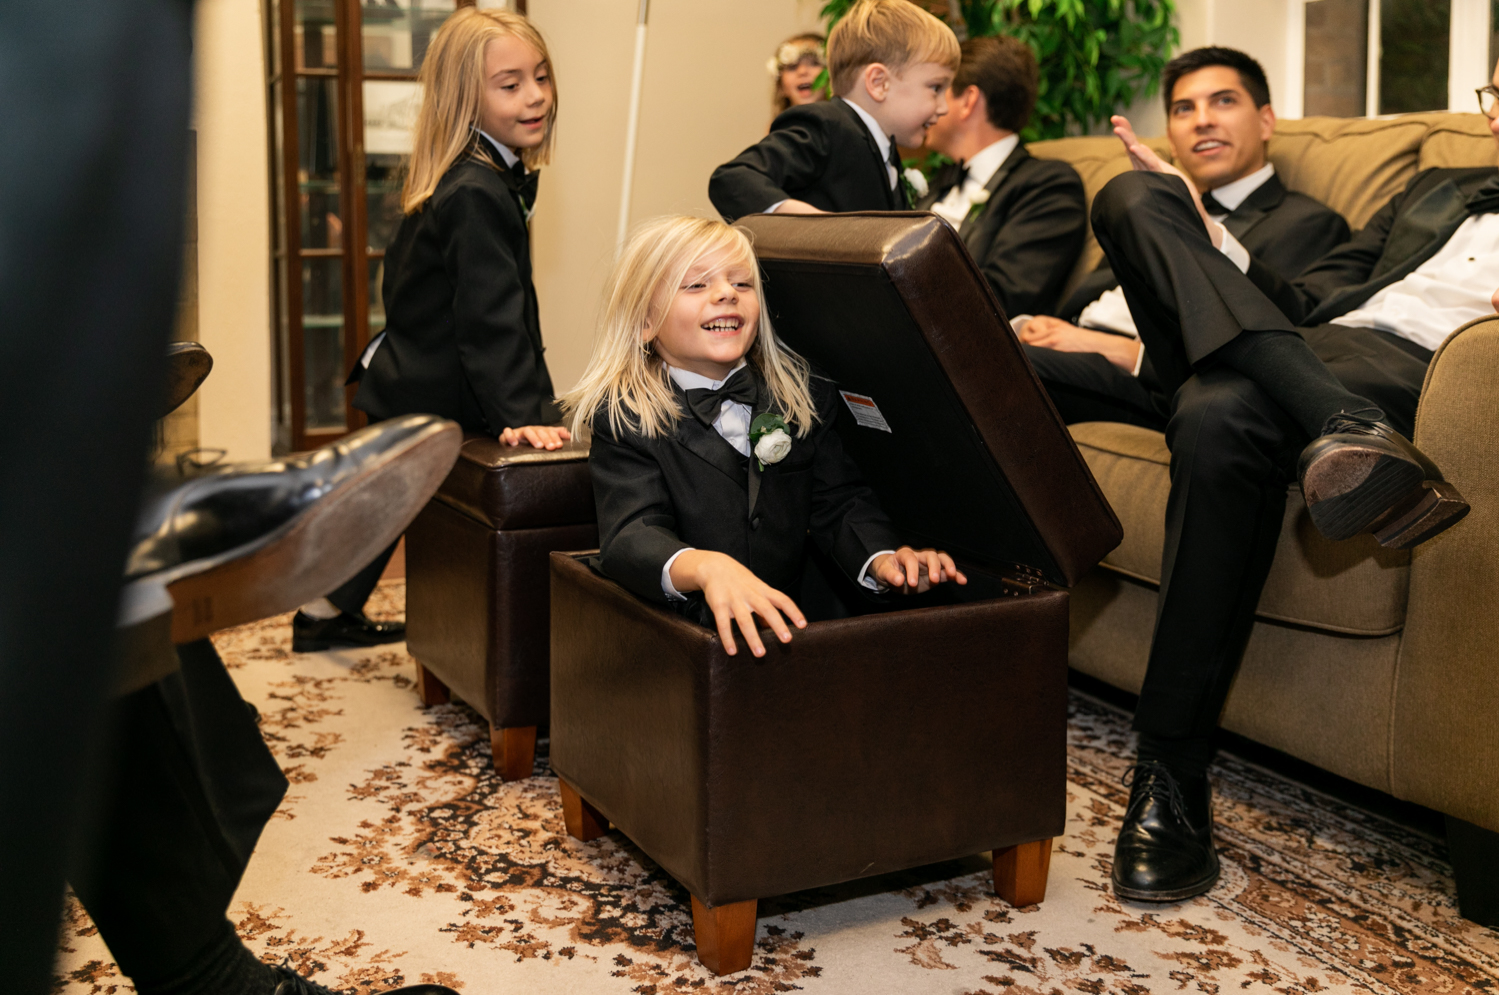 Kids play around with the groomsmen and hide in the ottomans.